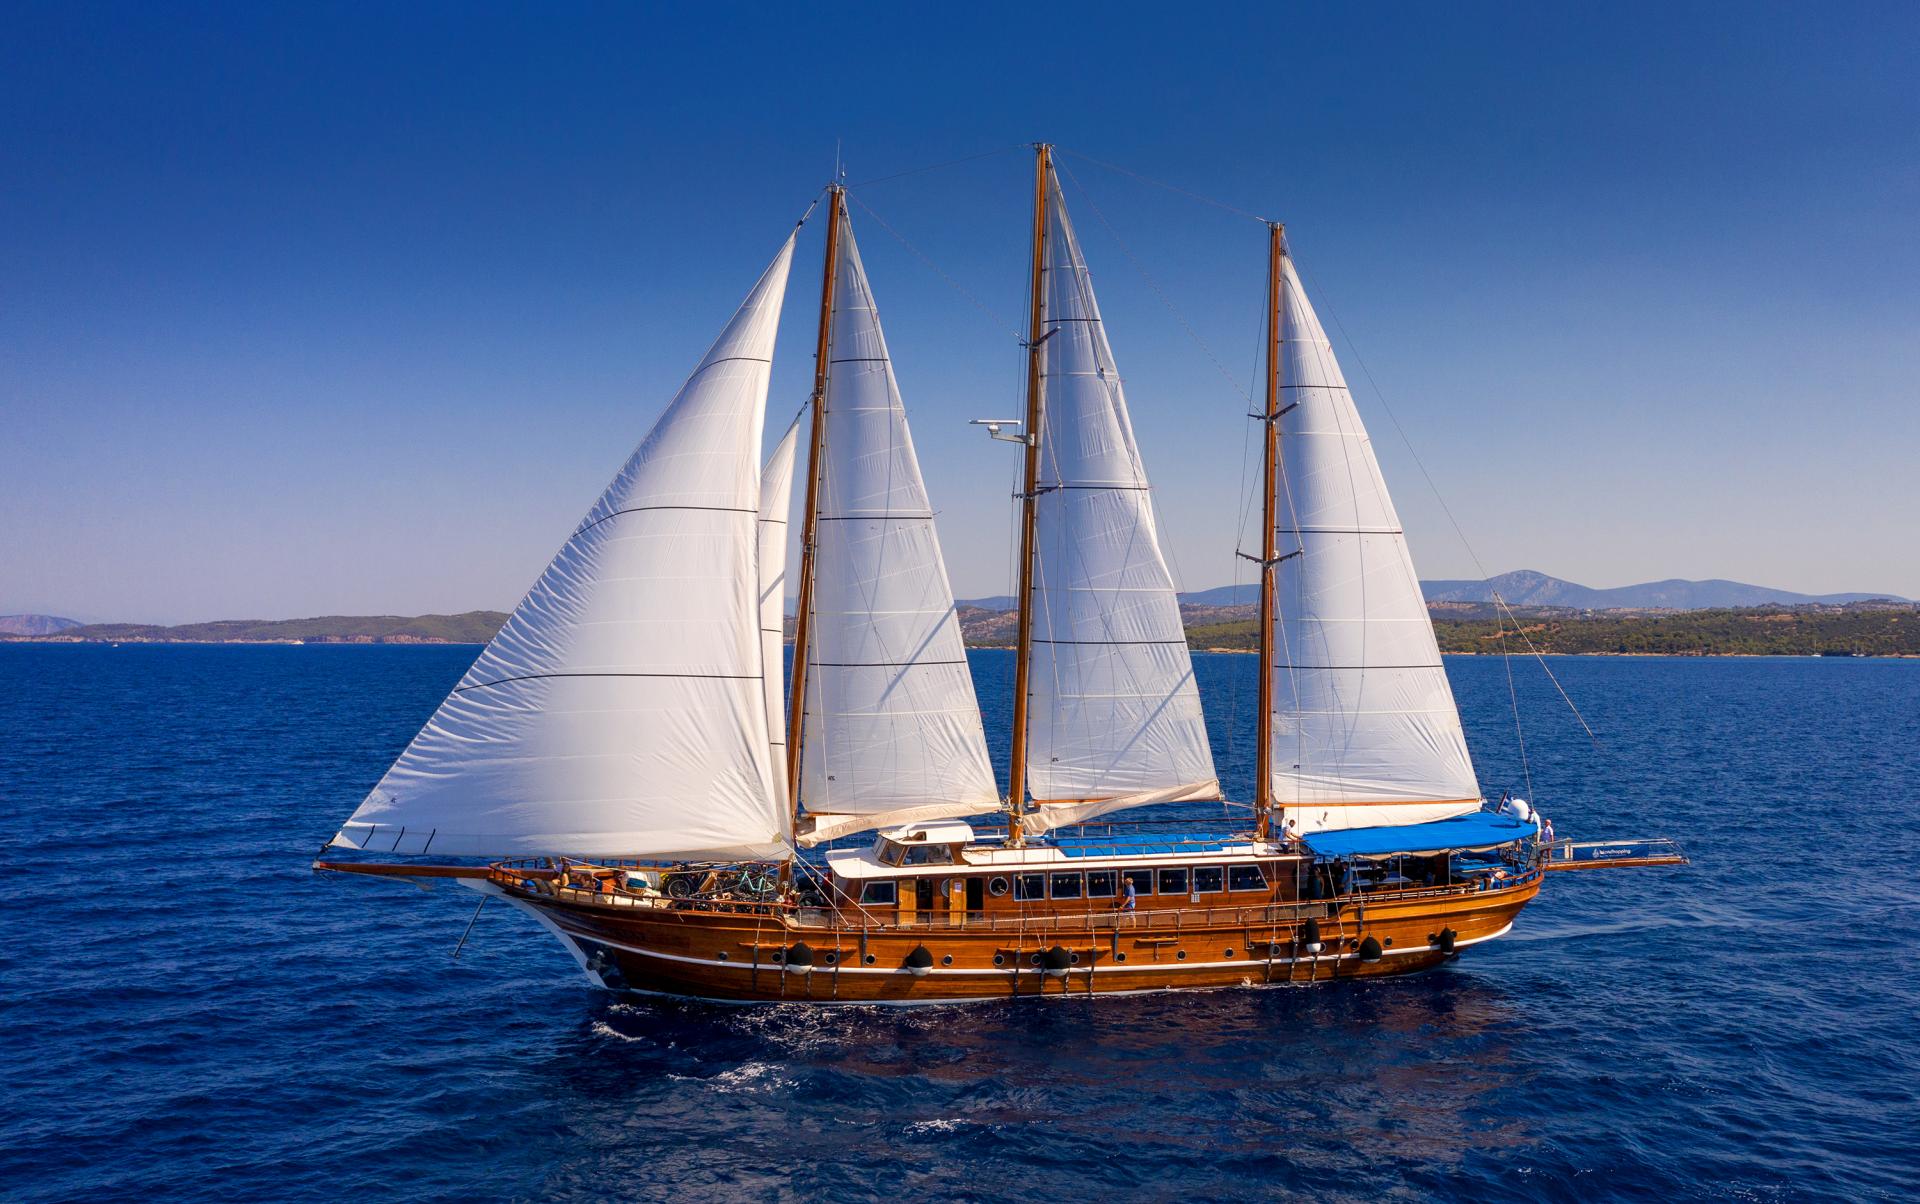 (c) Private-yacht-charter.com